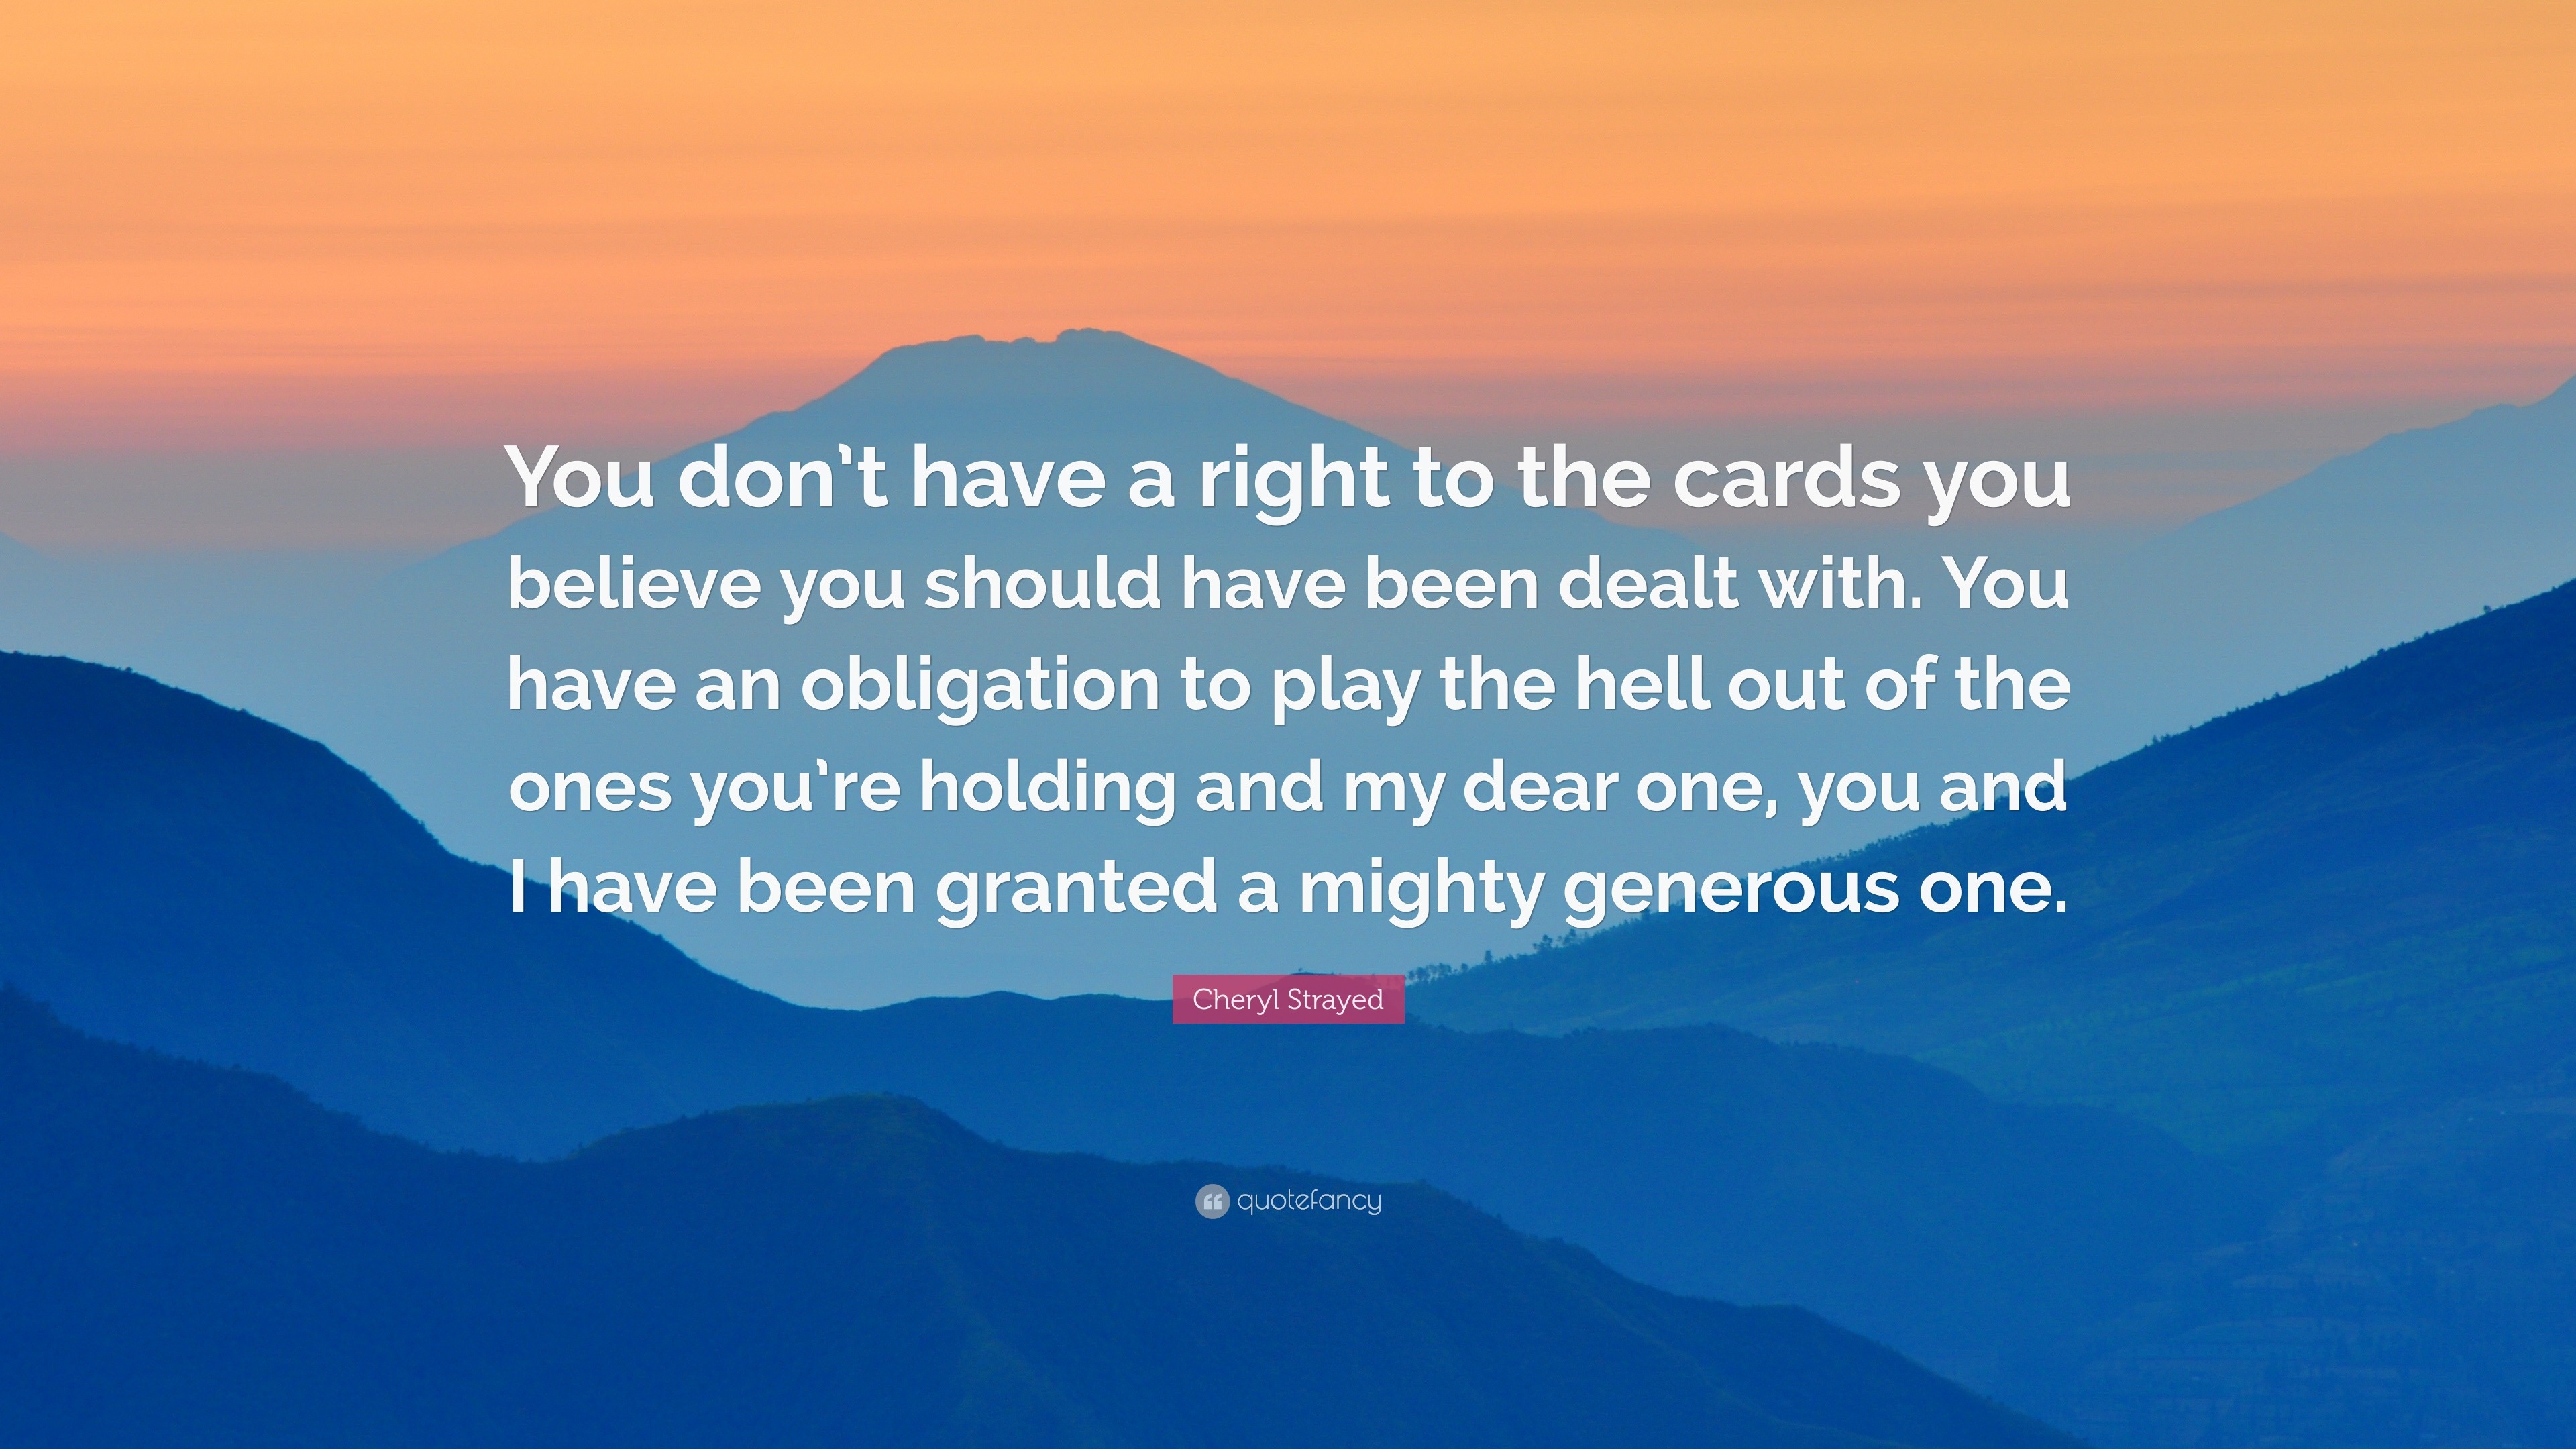 Cheryl Strayed Quote You Don T Have A Right To The Cards You Believe You Should Have Been Dealt With You Have An Obligation To Play The Hell